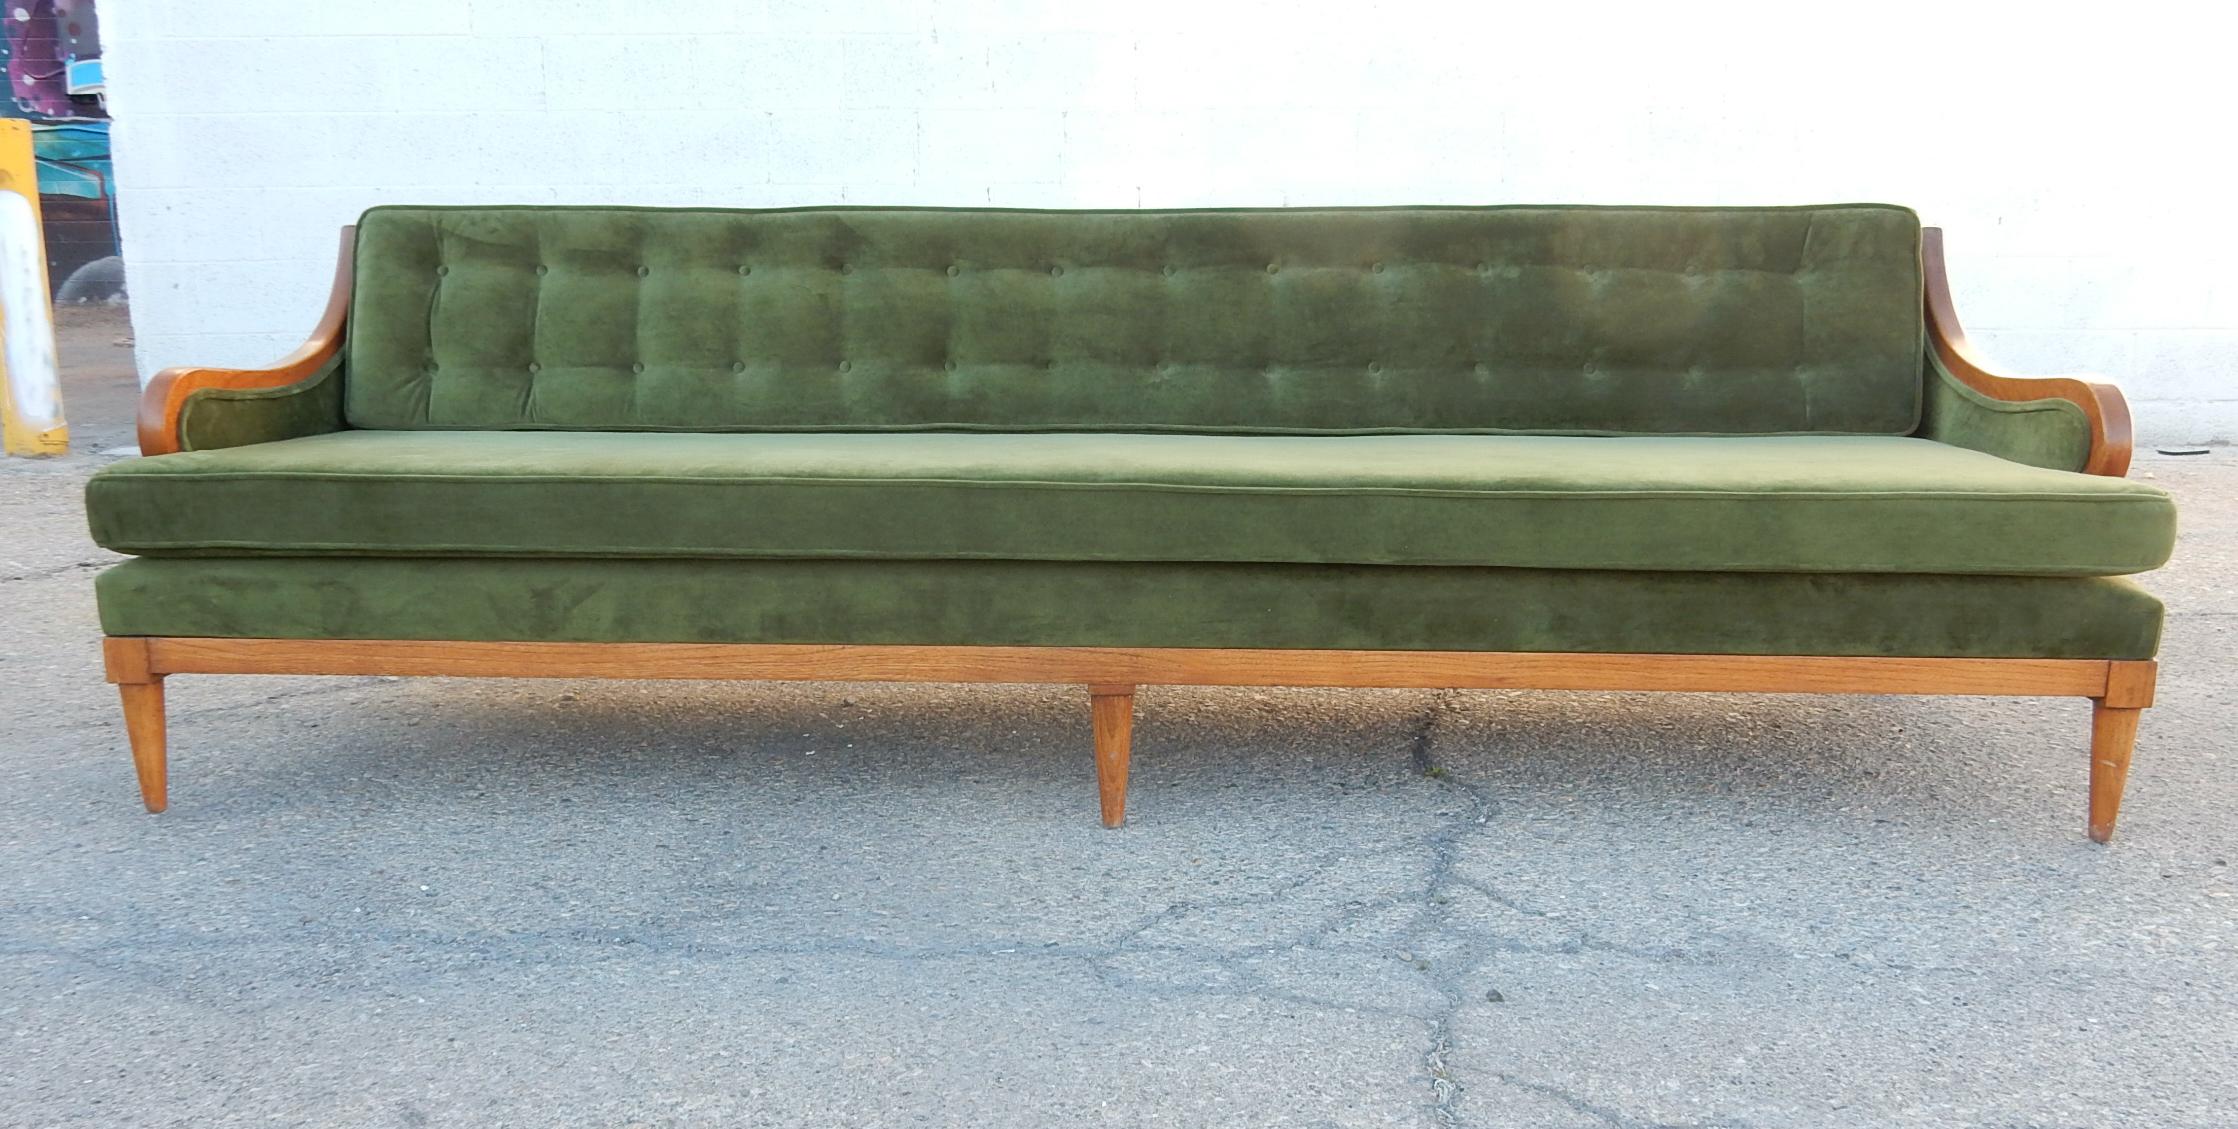 Fabulous green velvet sofa with tufted back cushion and golden wood frame.
Single seat cushion, 8 feet long. Plush and so very comfortable.
Solid high quality piece, designer unknown.